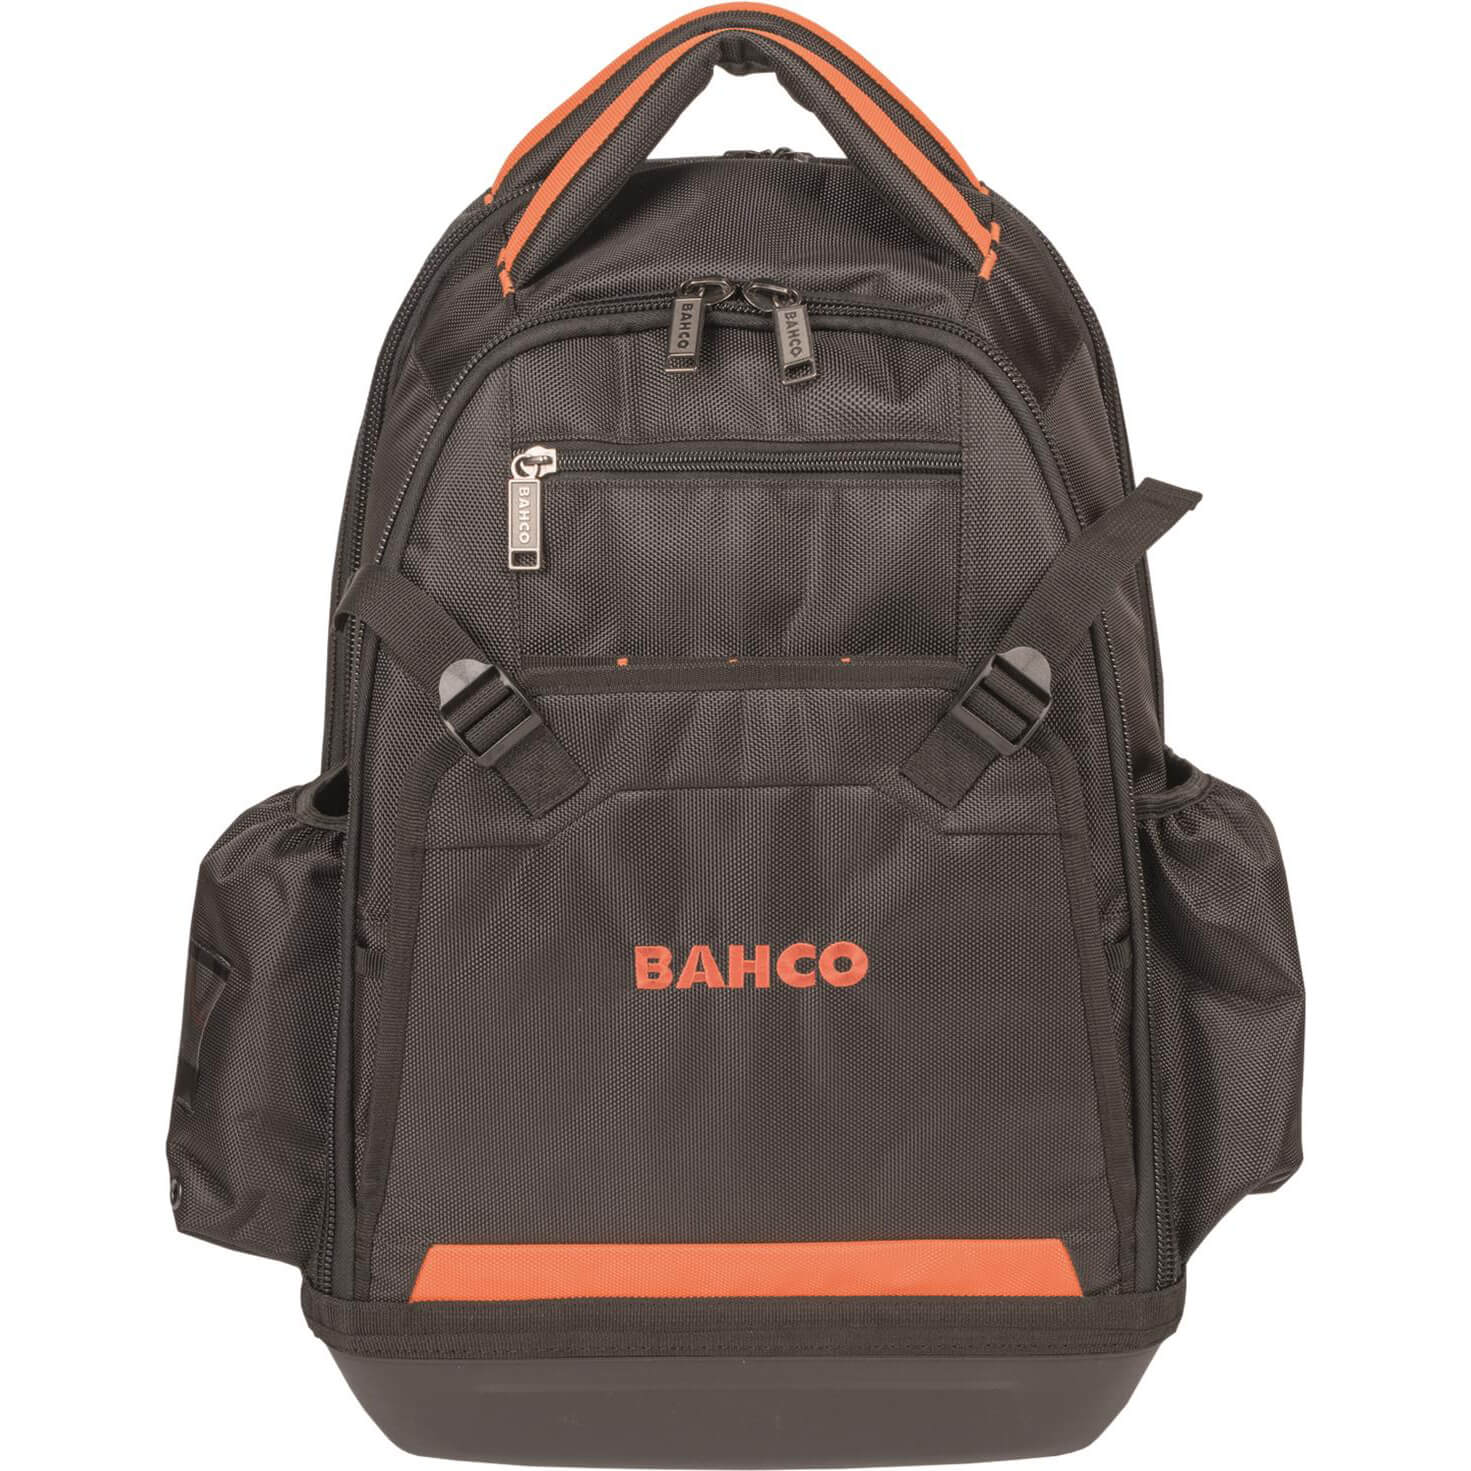 Bahco Electricians Heavy Duty Backpack